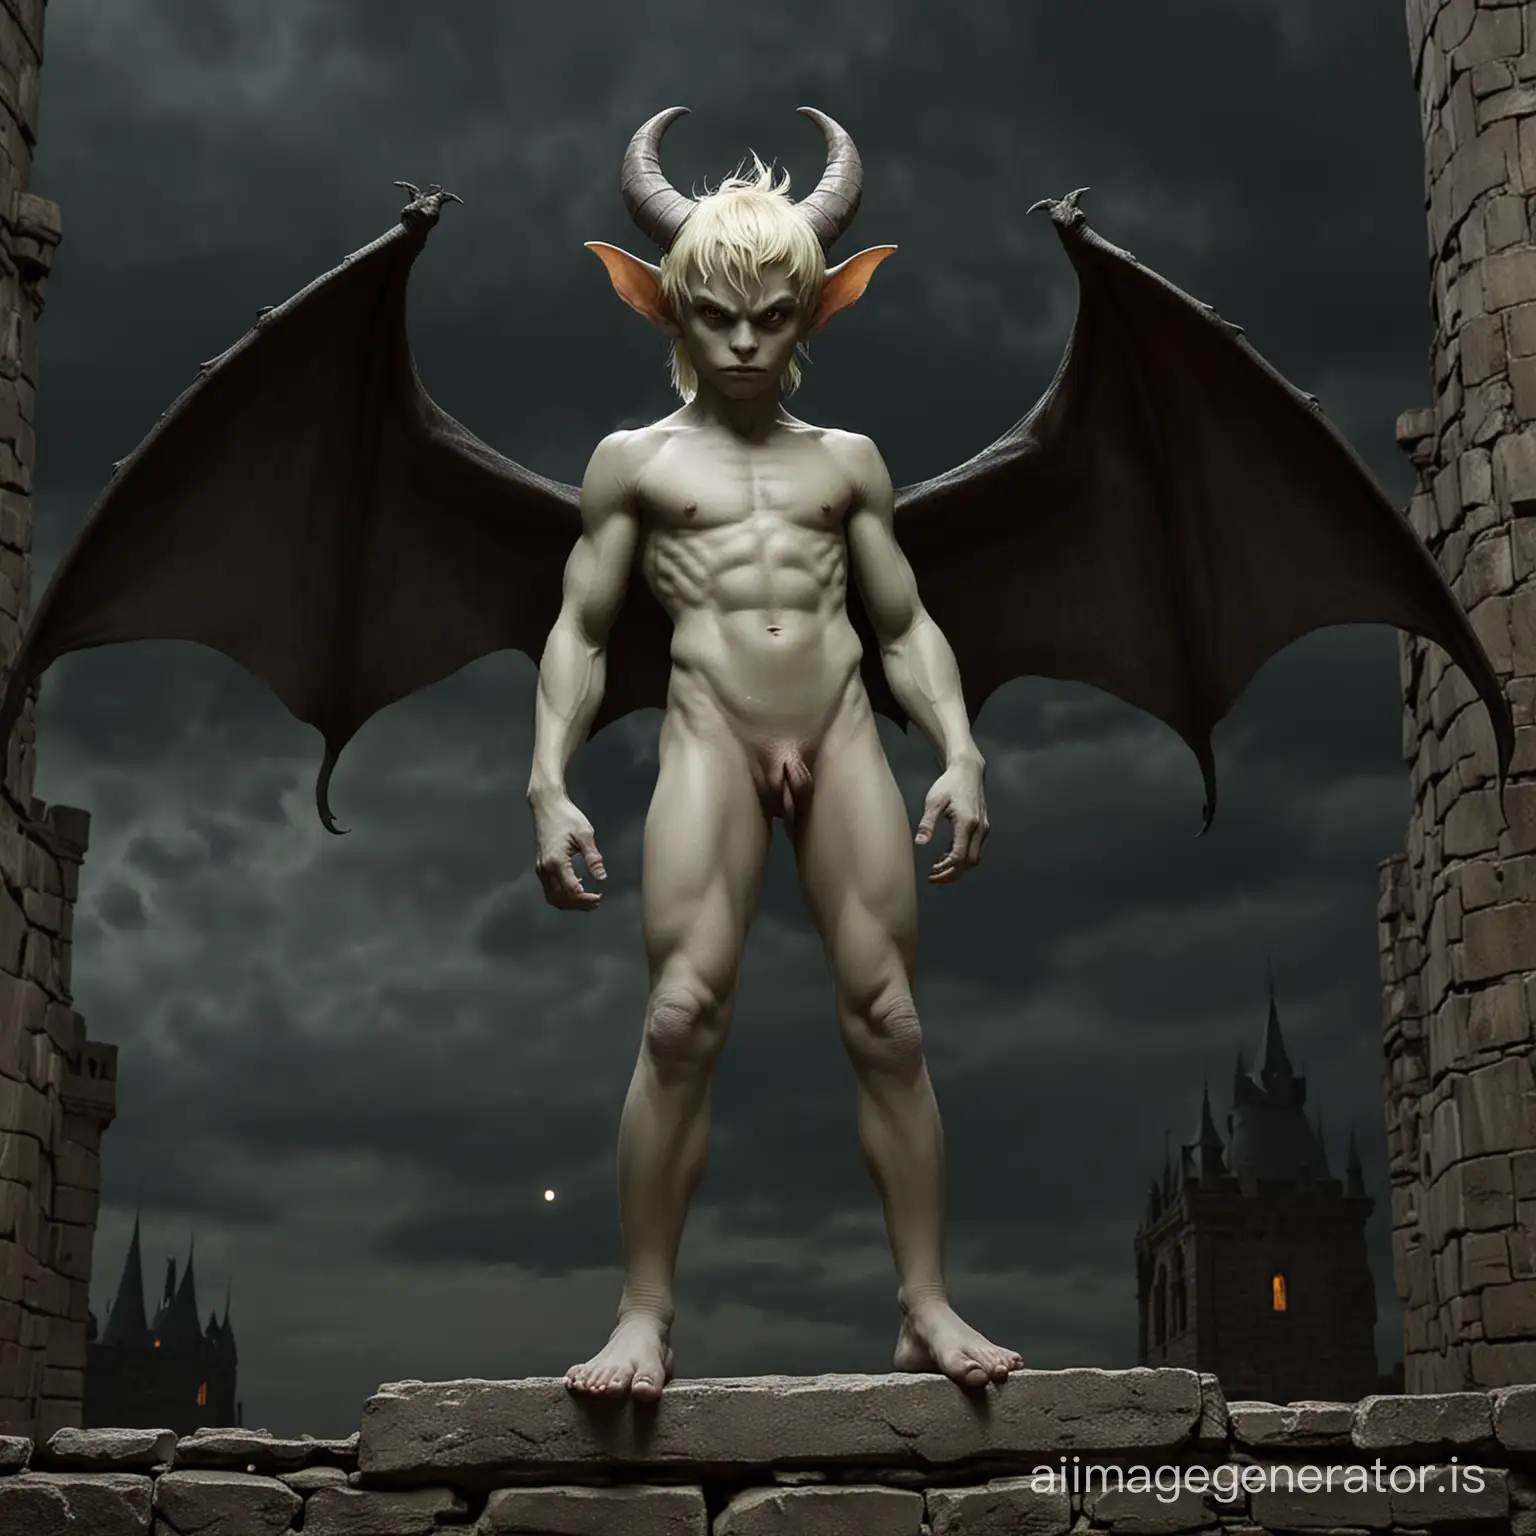 Night-Demon-Boy-with-Bat-Wings-and-Tail-Standing-on-Old-Castle